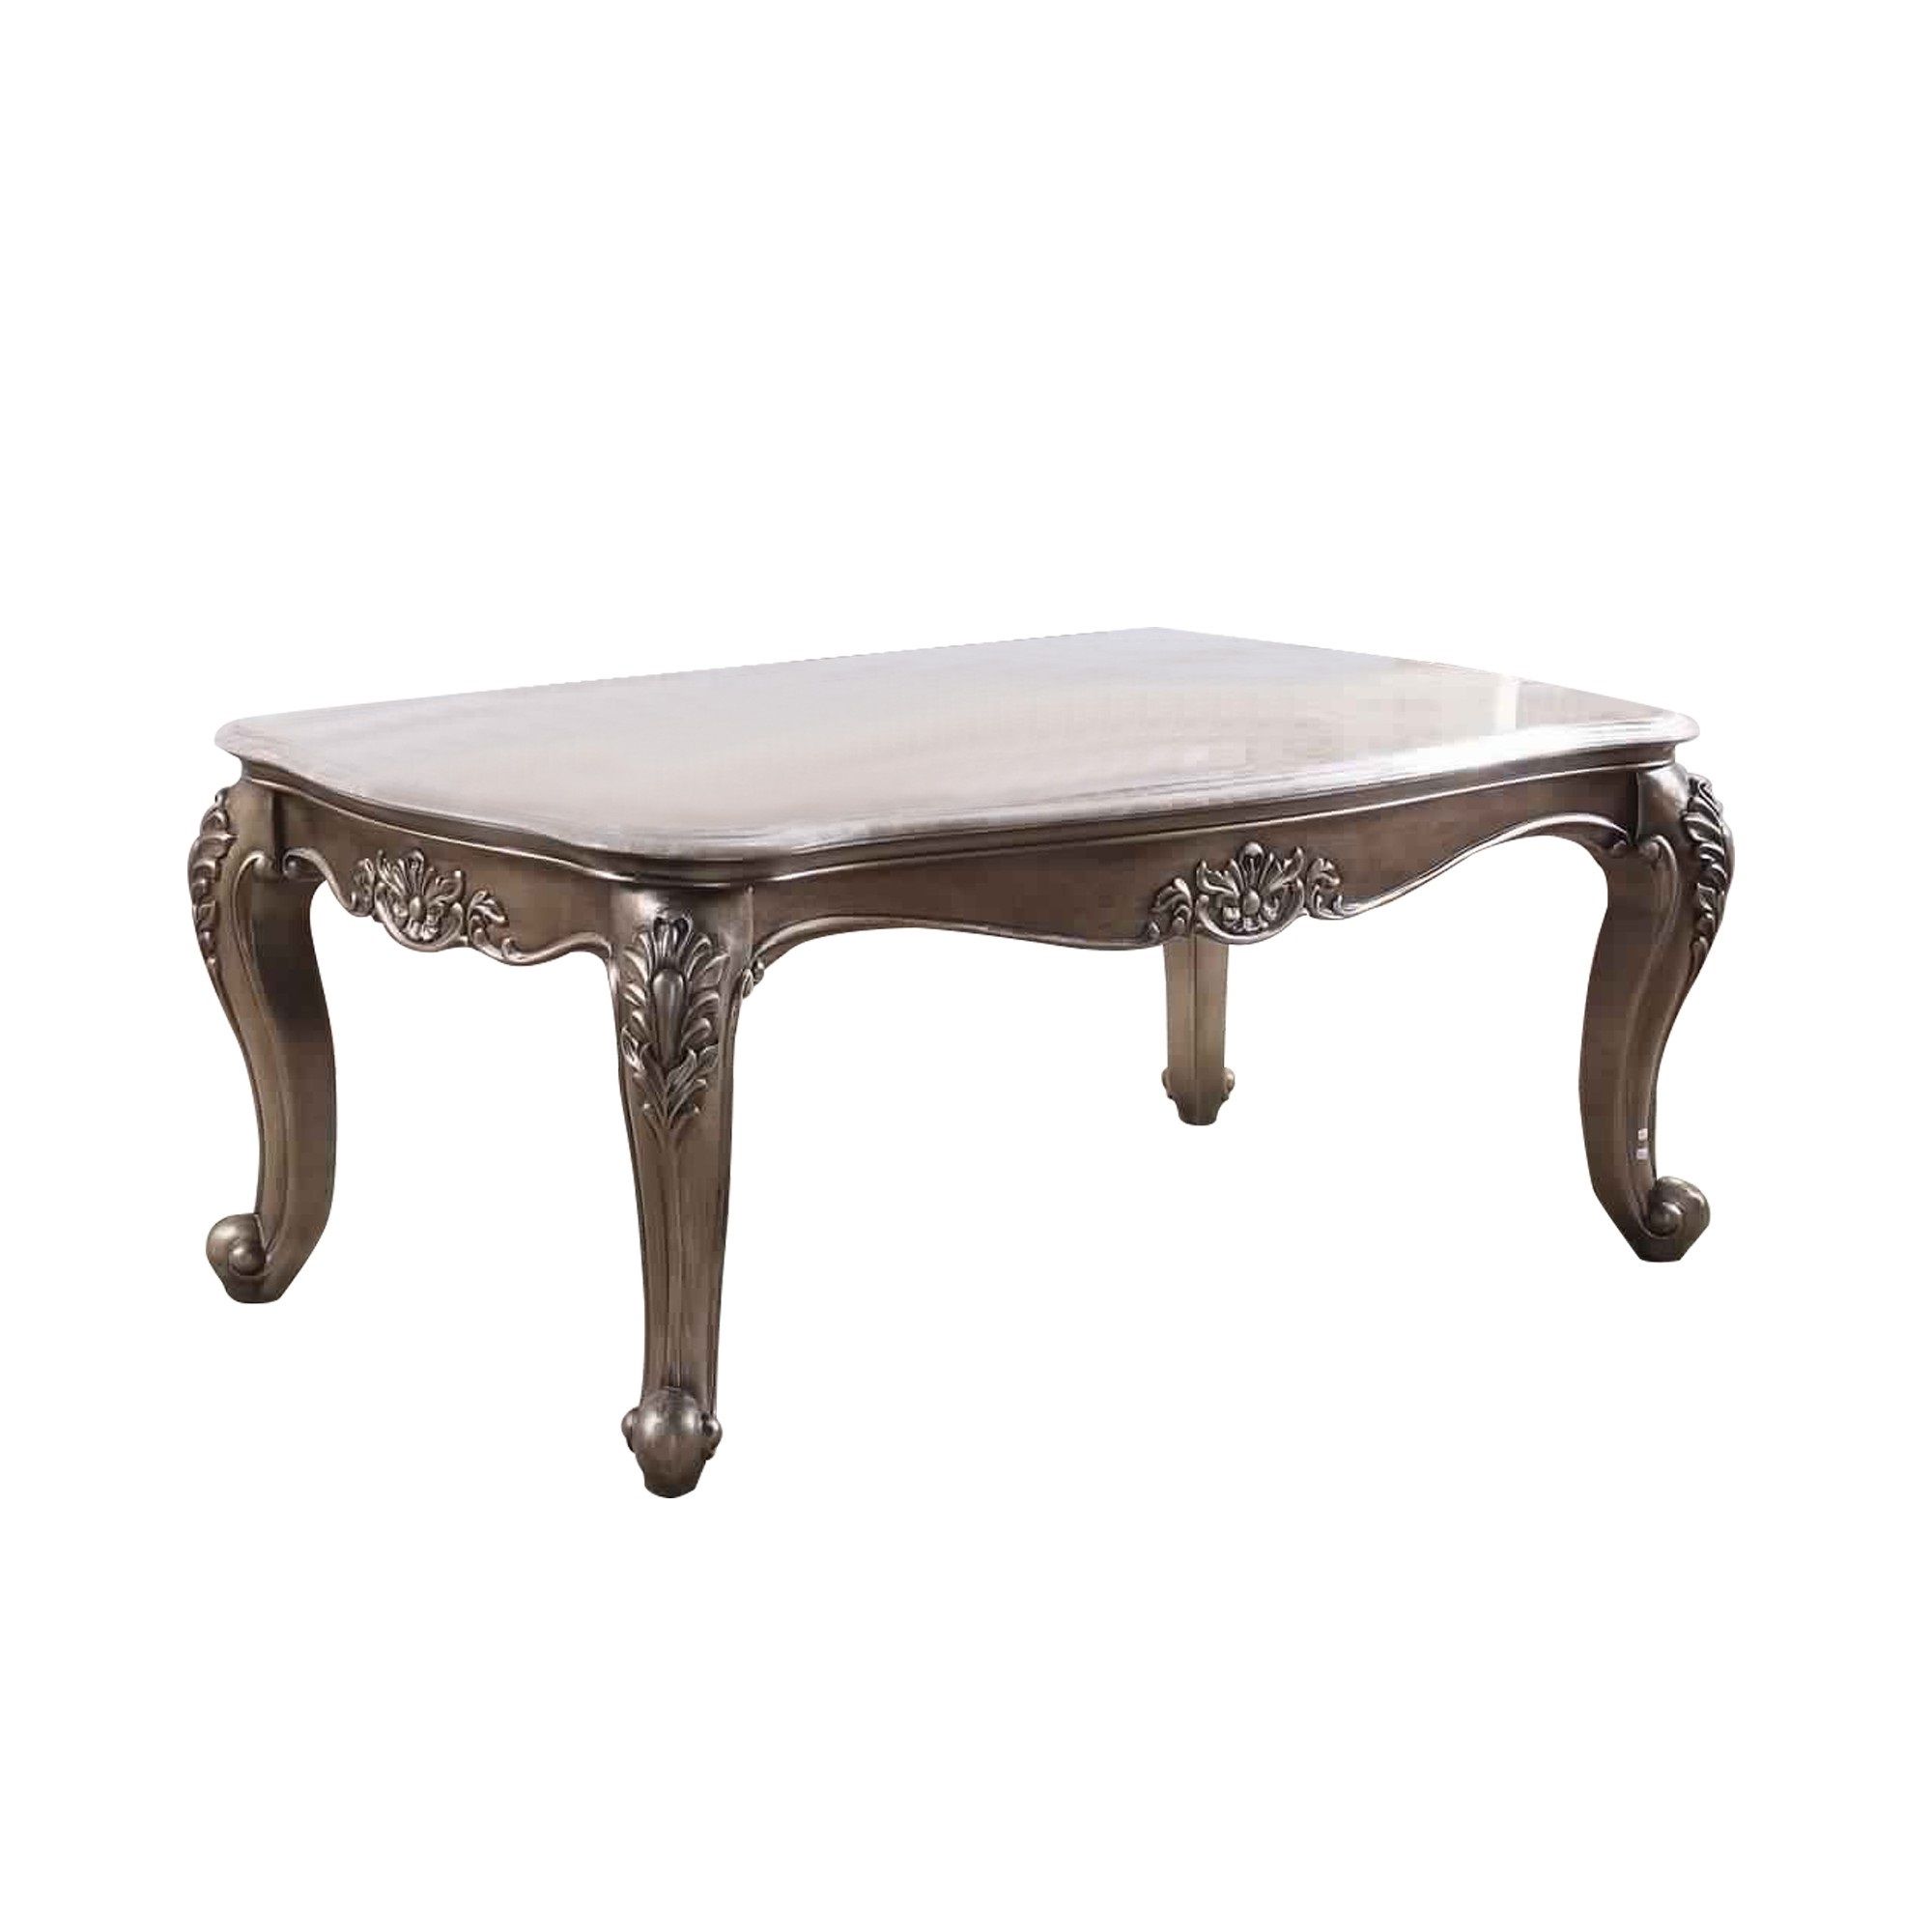 Trendy Faux White Marble And Metal Coffee Tables With Faux Marble Top Engraved Wooden Frame Coffee Table, Off (View 6 of 20)